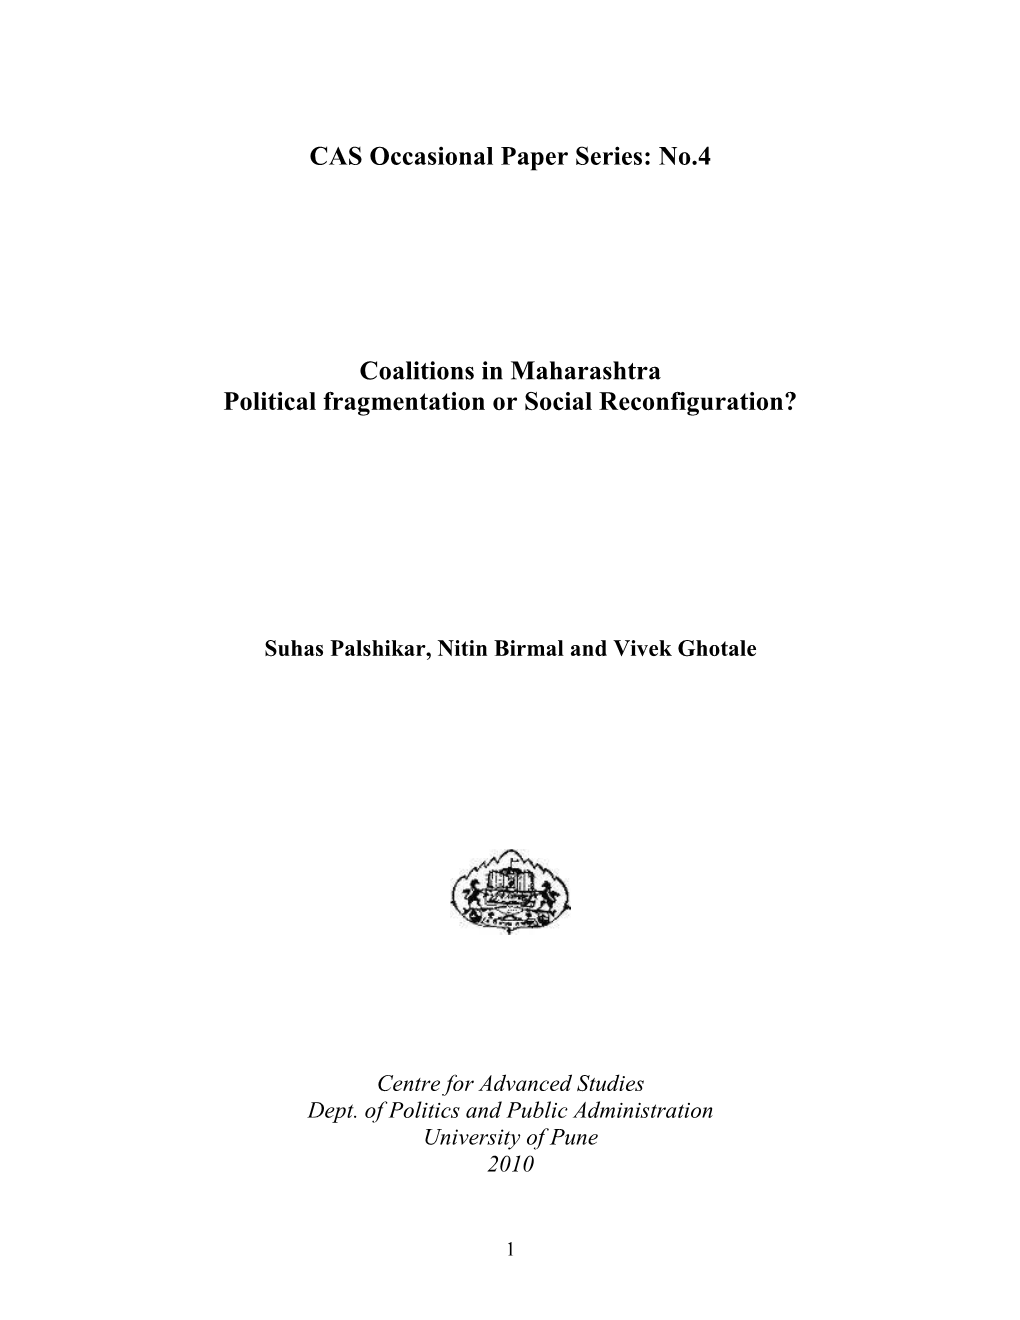 CAS Occasional Paper Series: No.4 Coalitions in Maharashtra Political